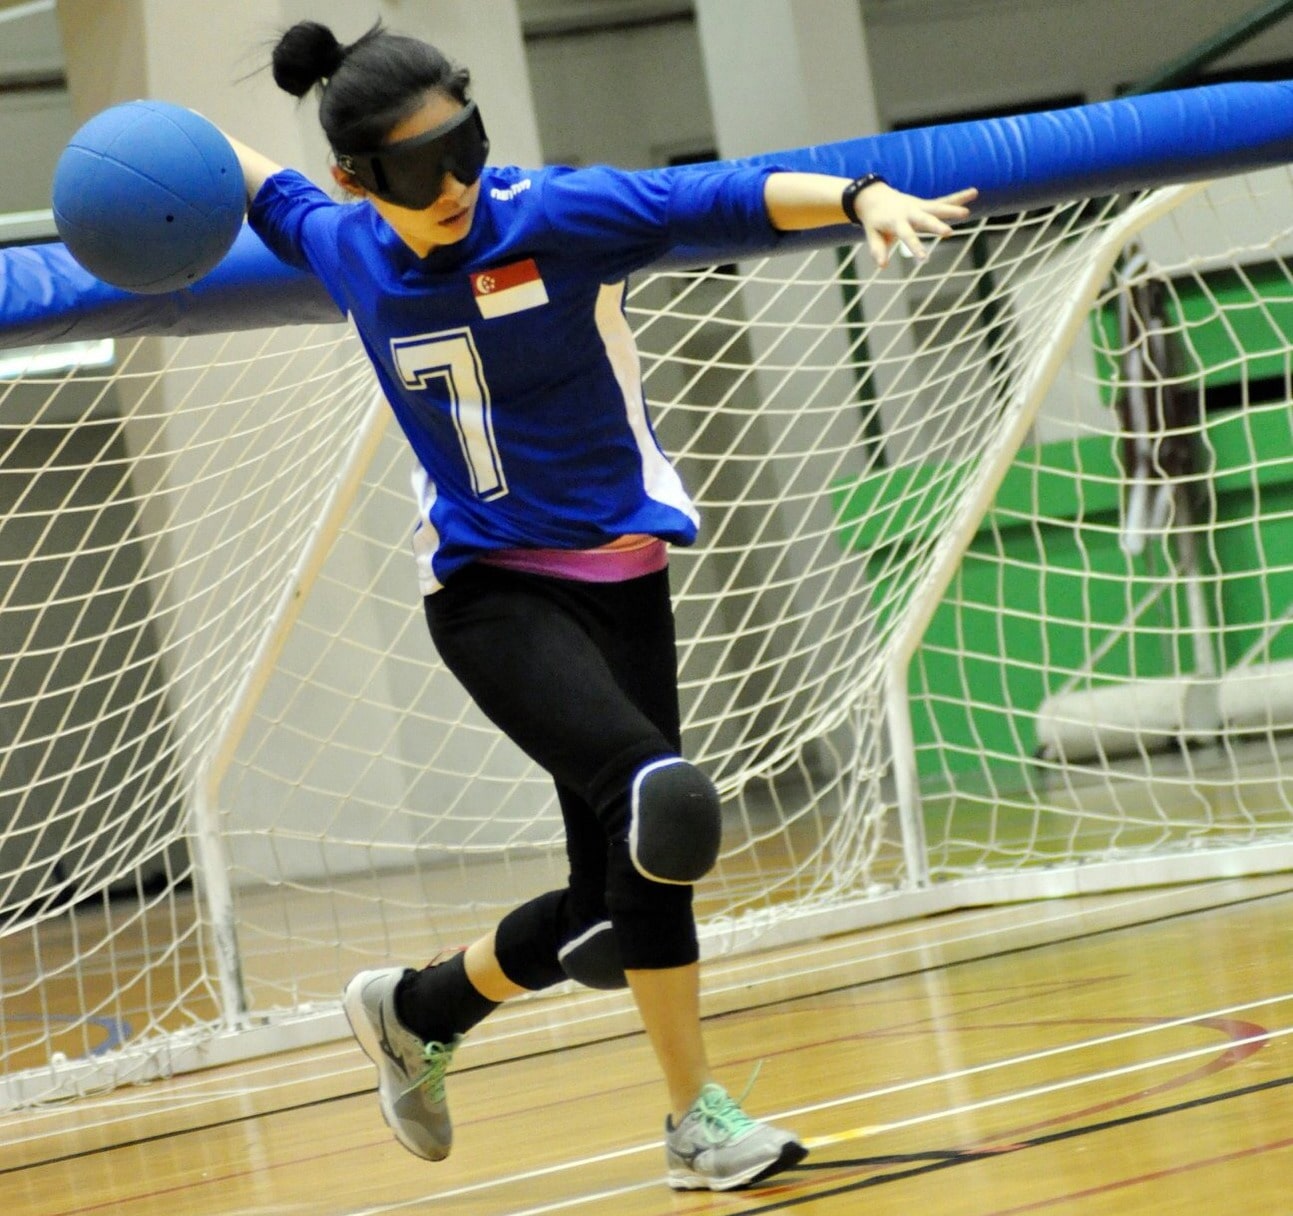 Person With Disabilities - goalball